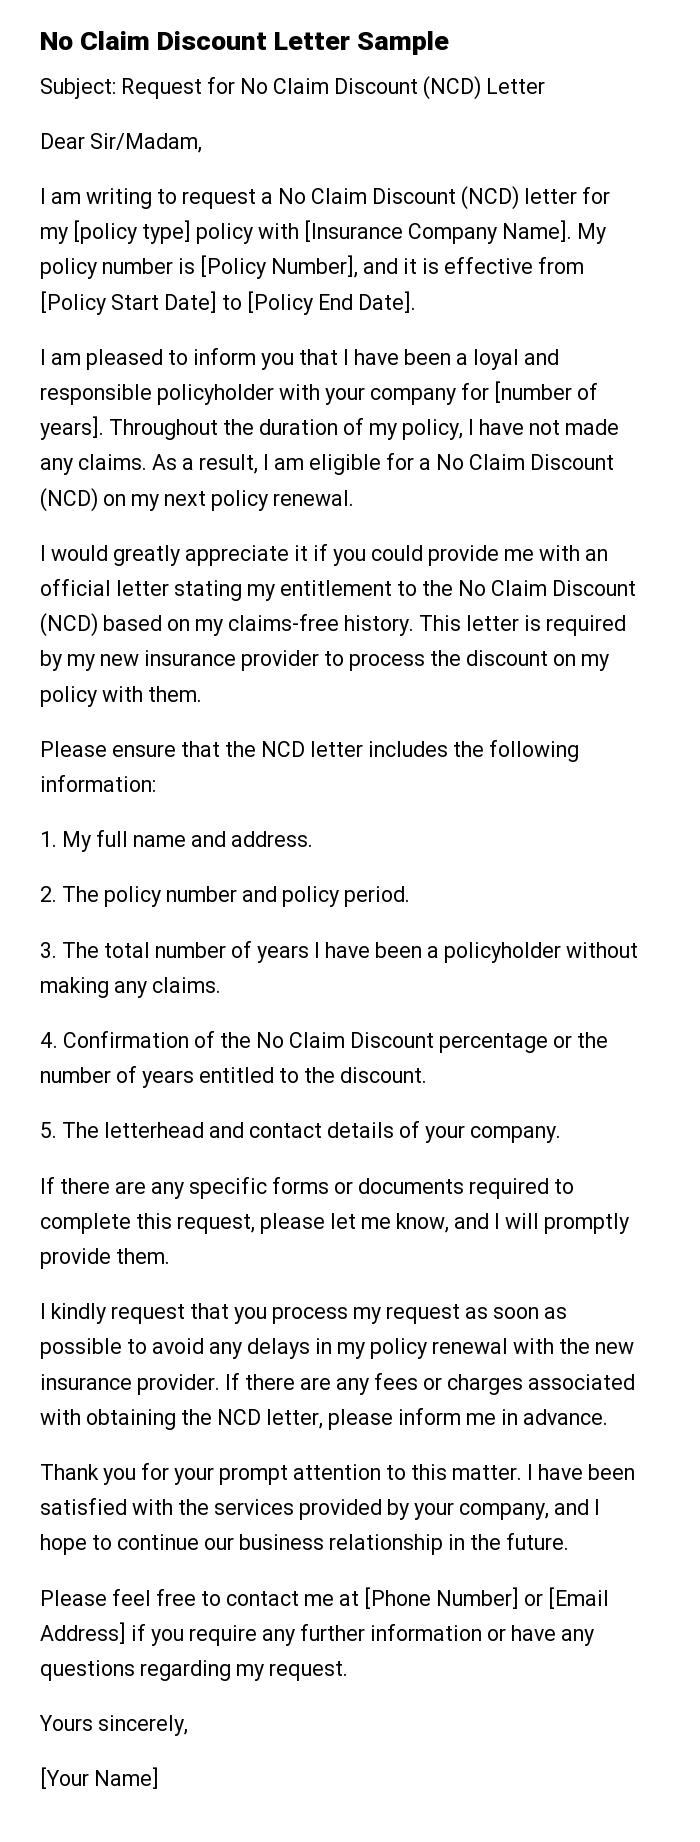 No Claim Discount Letter Sample